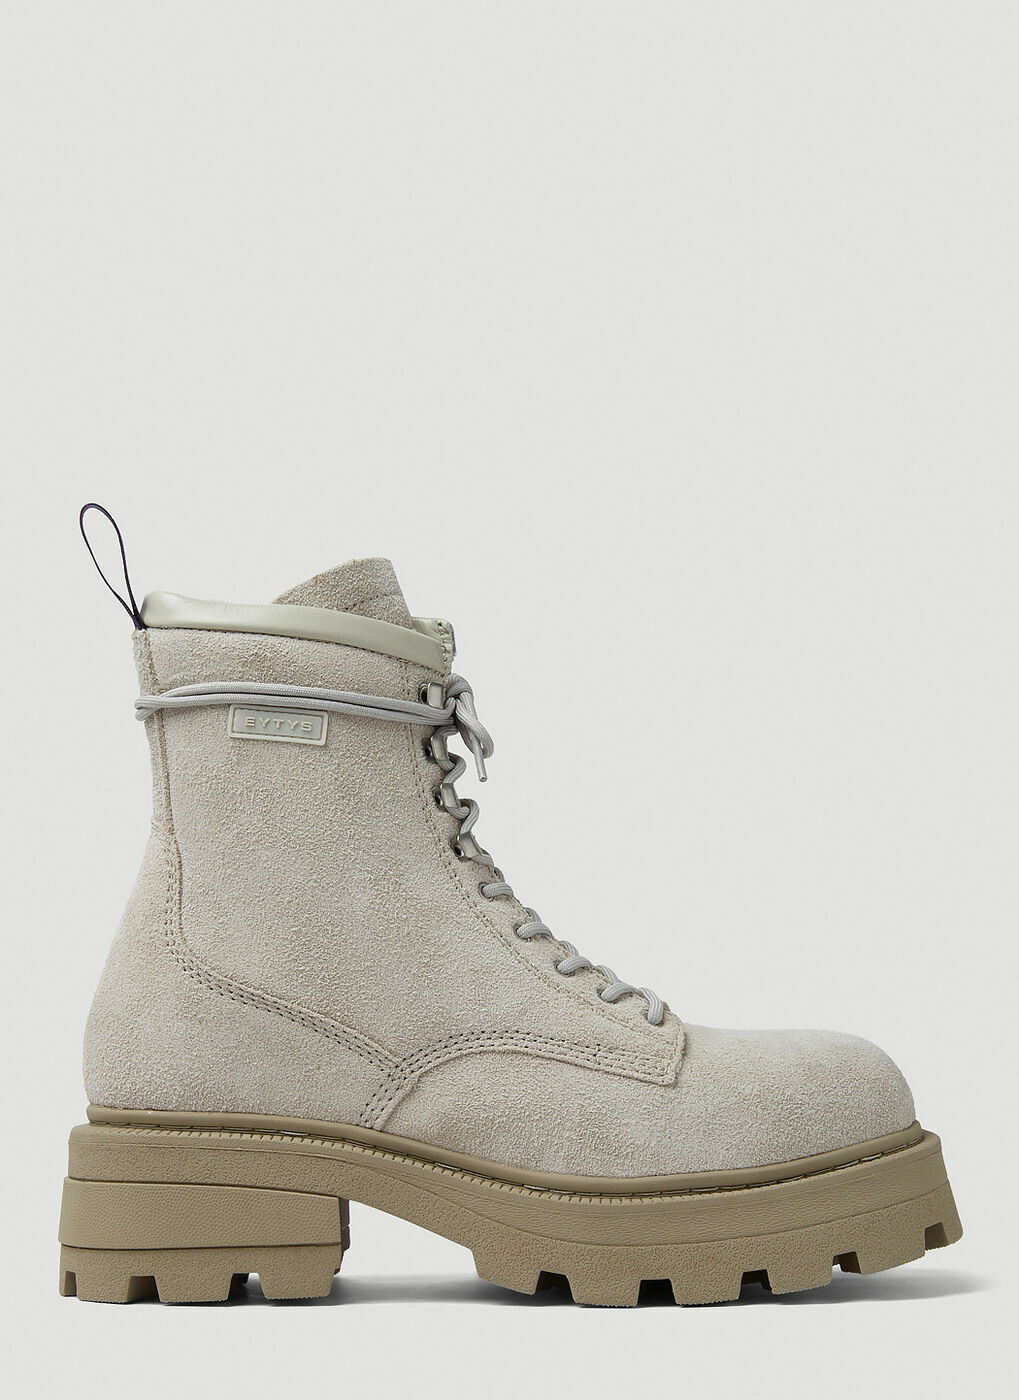 Michigan Lace Up Boots in Grey Eytys